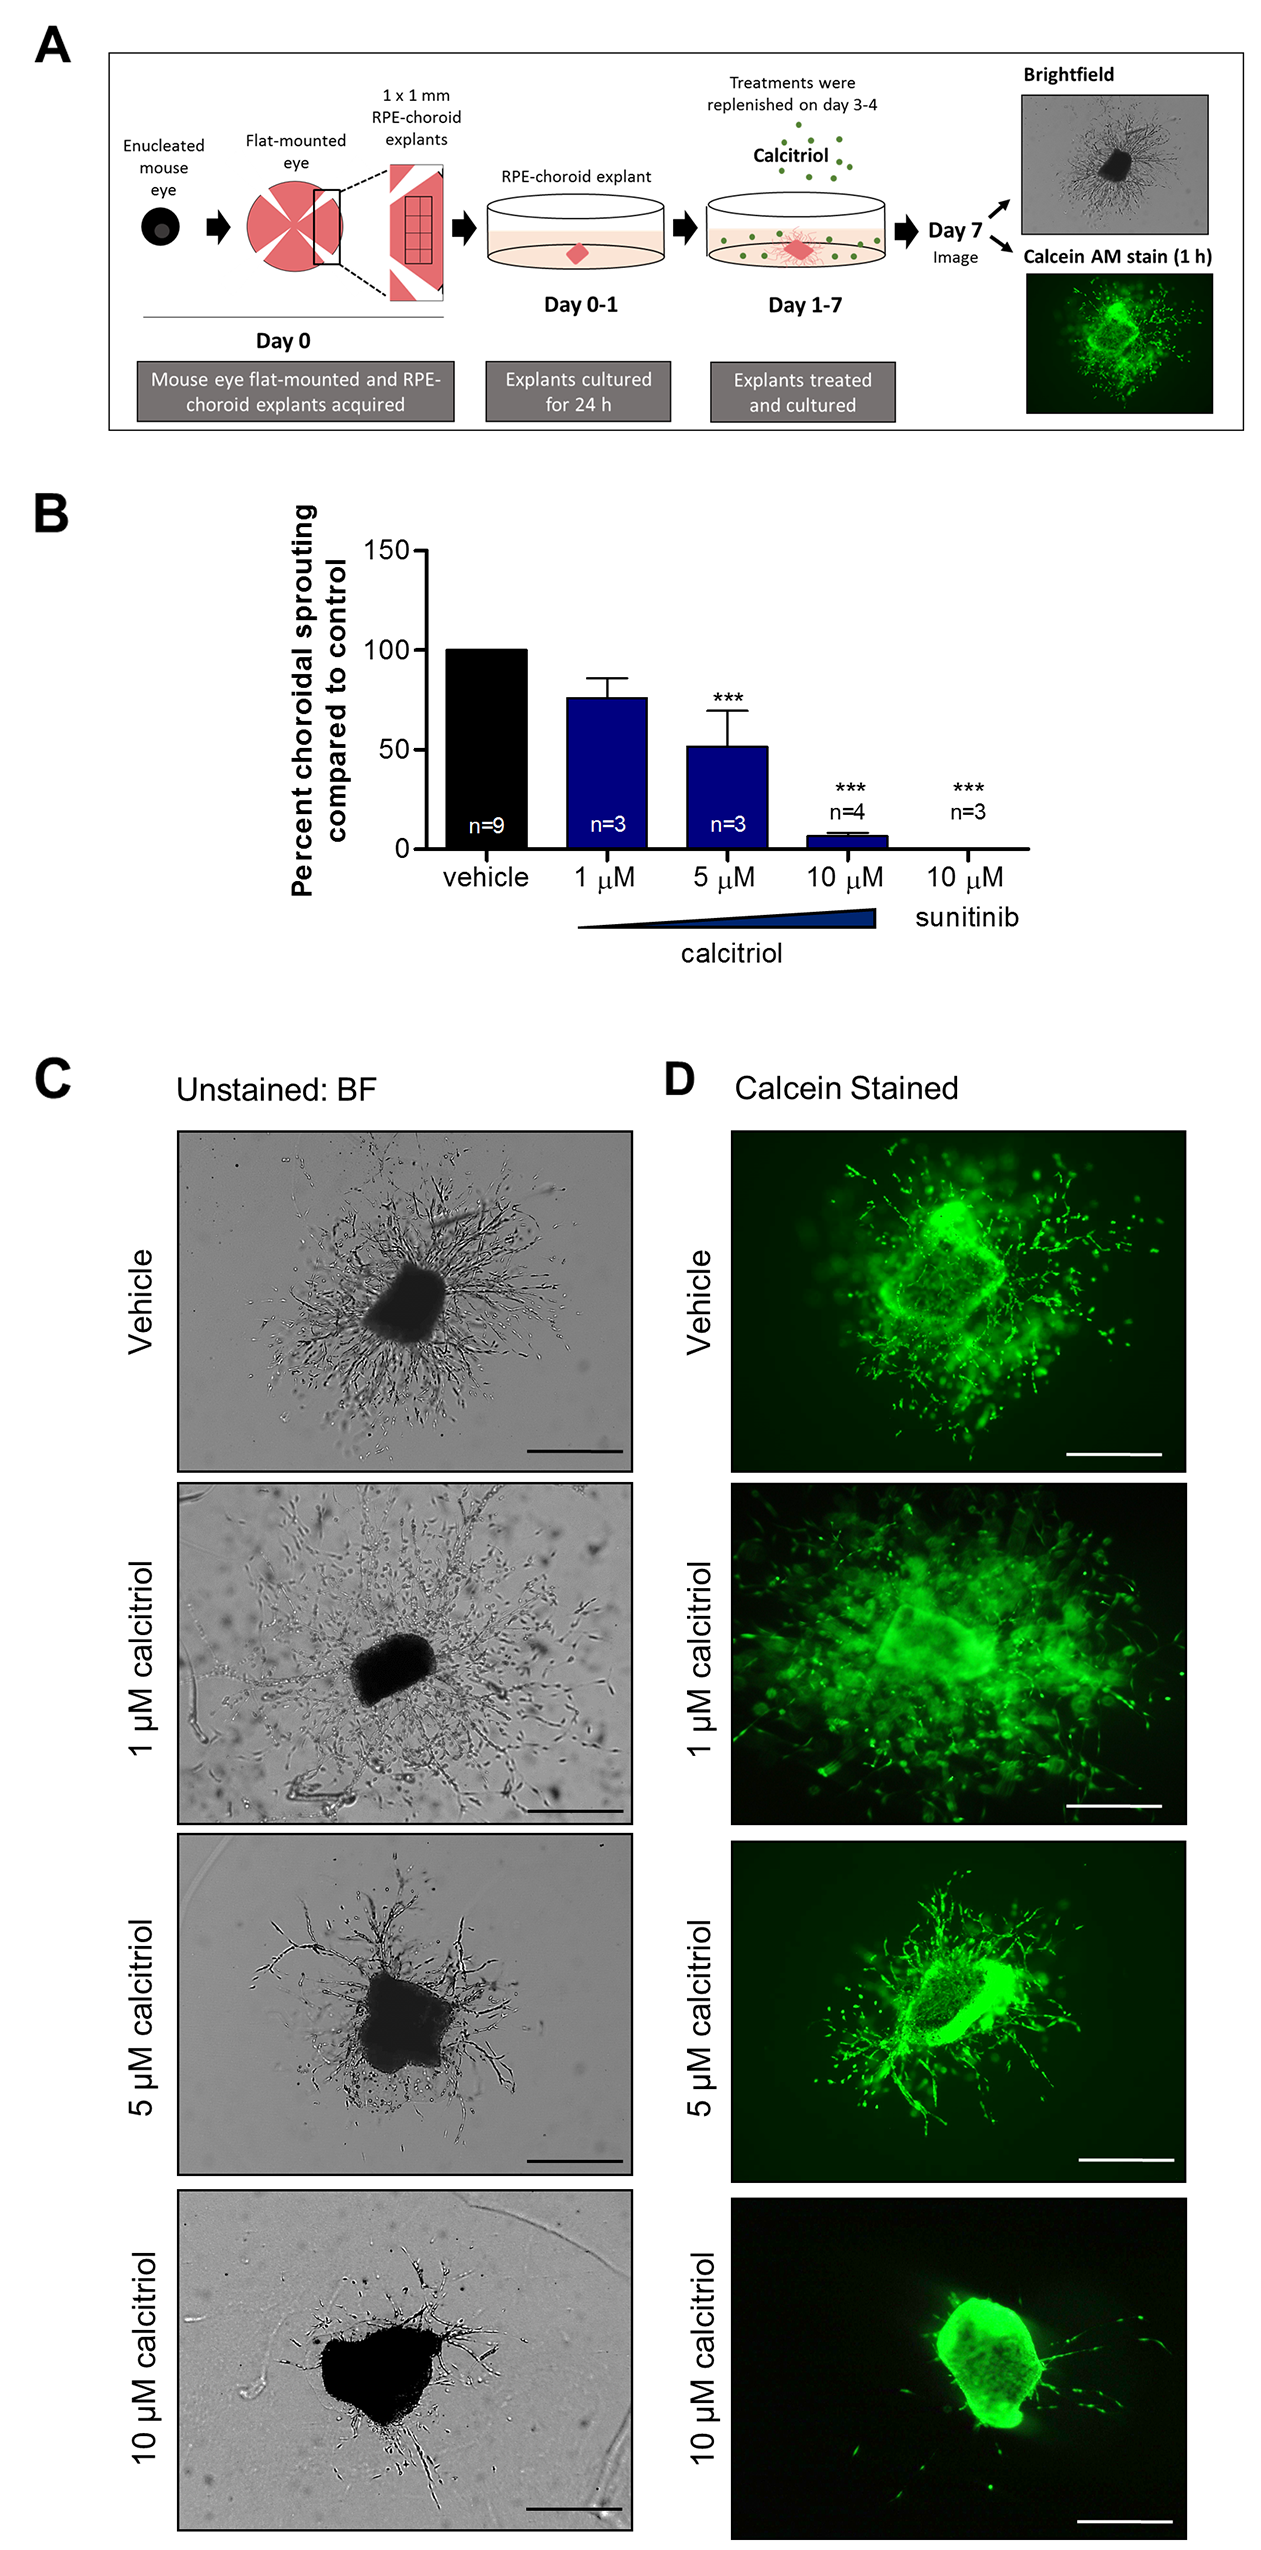 Calcitriol attenuates mouse choroidal sprouting angiogenesis.